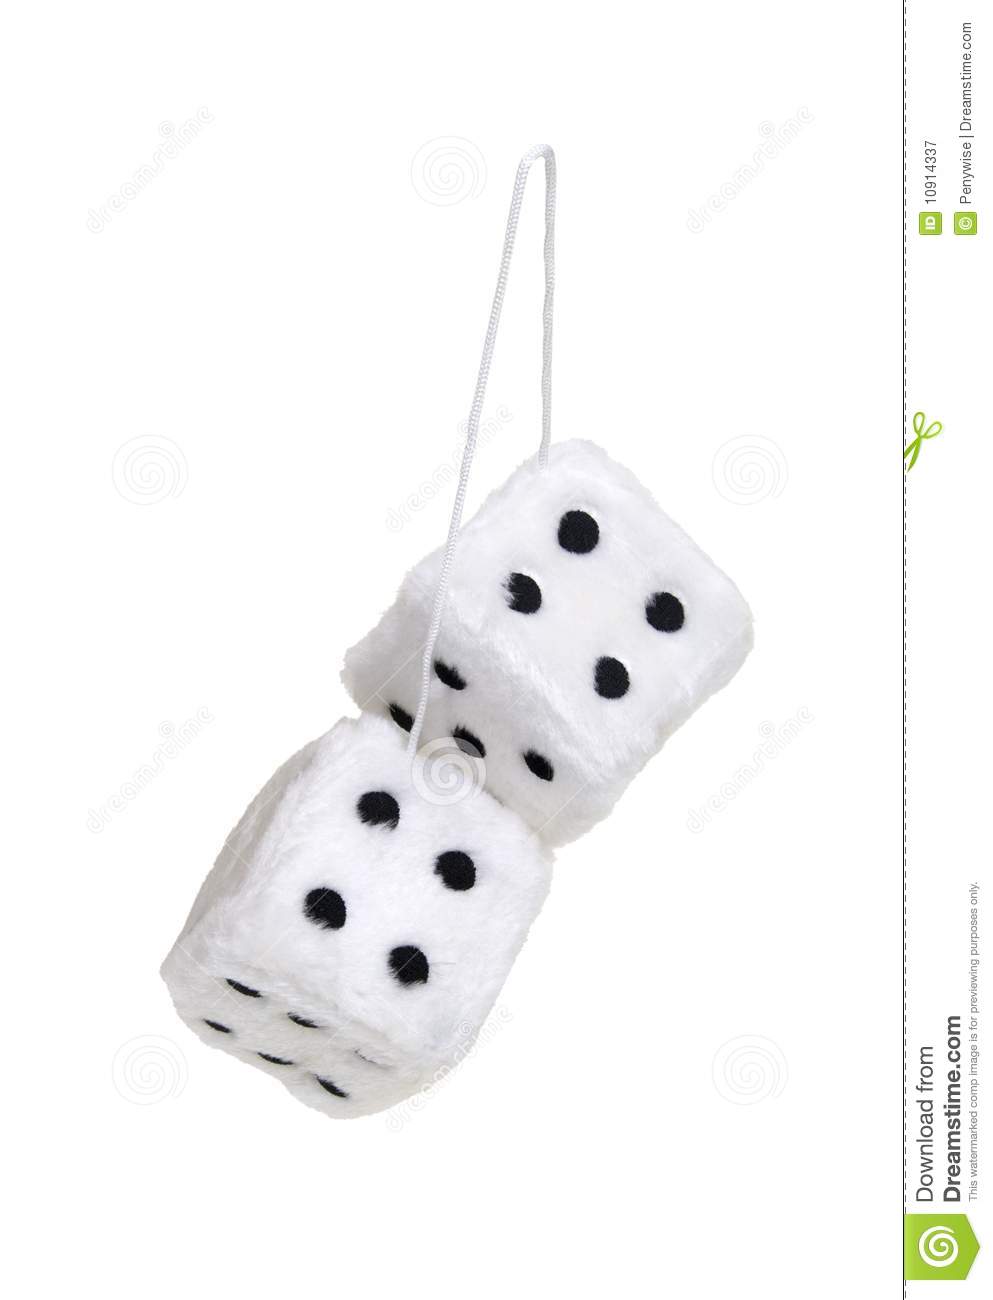 Fuzzy Dice That Are Usually Hung From The Rear View Mirror Of A Car    